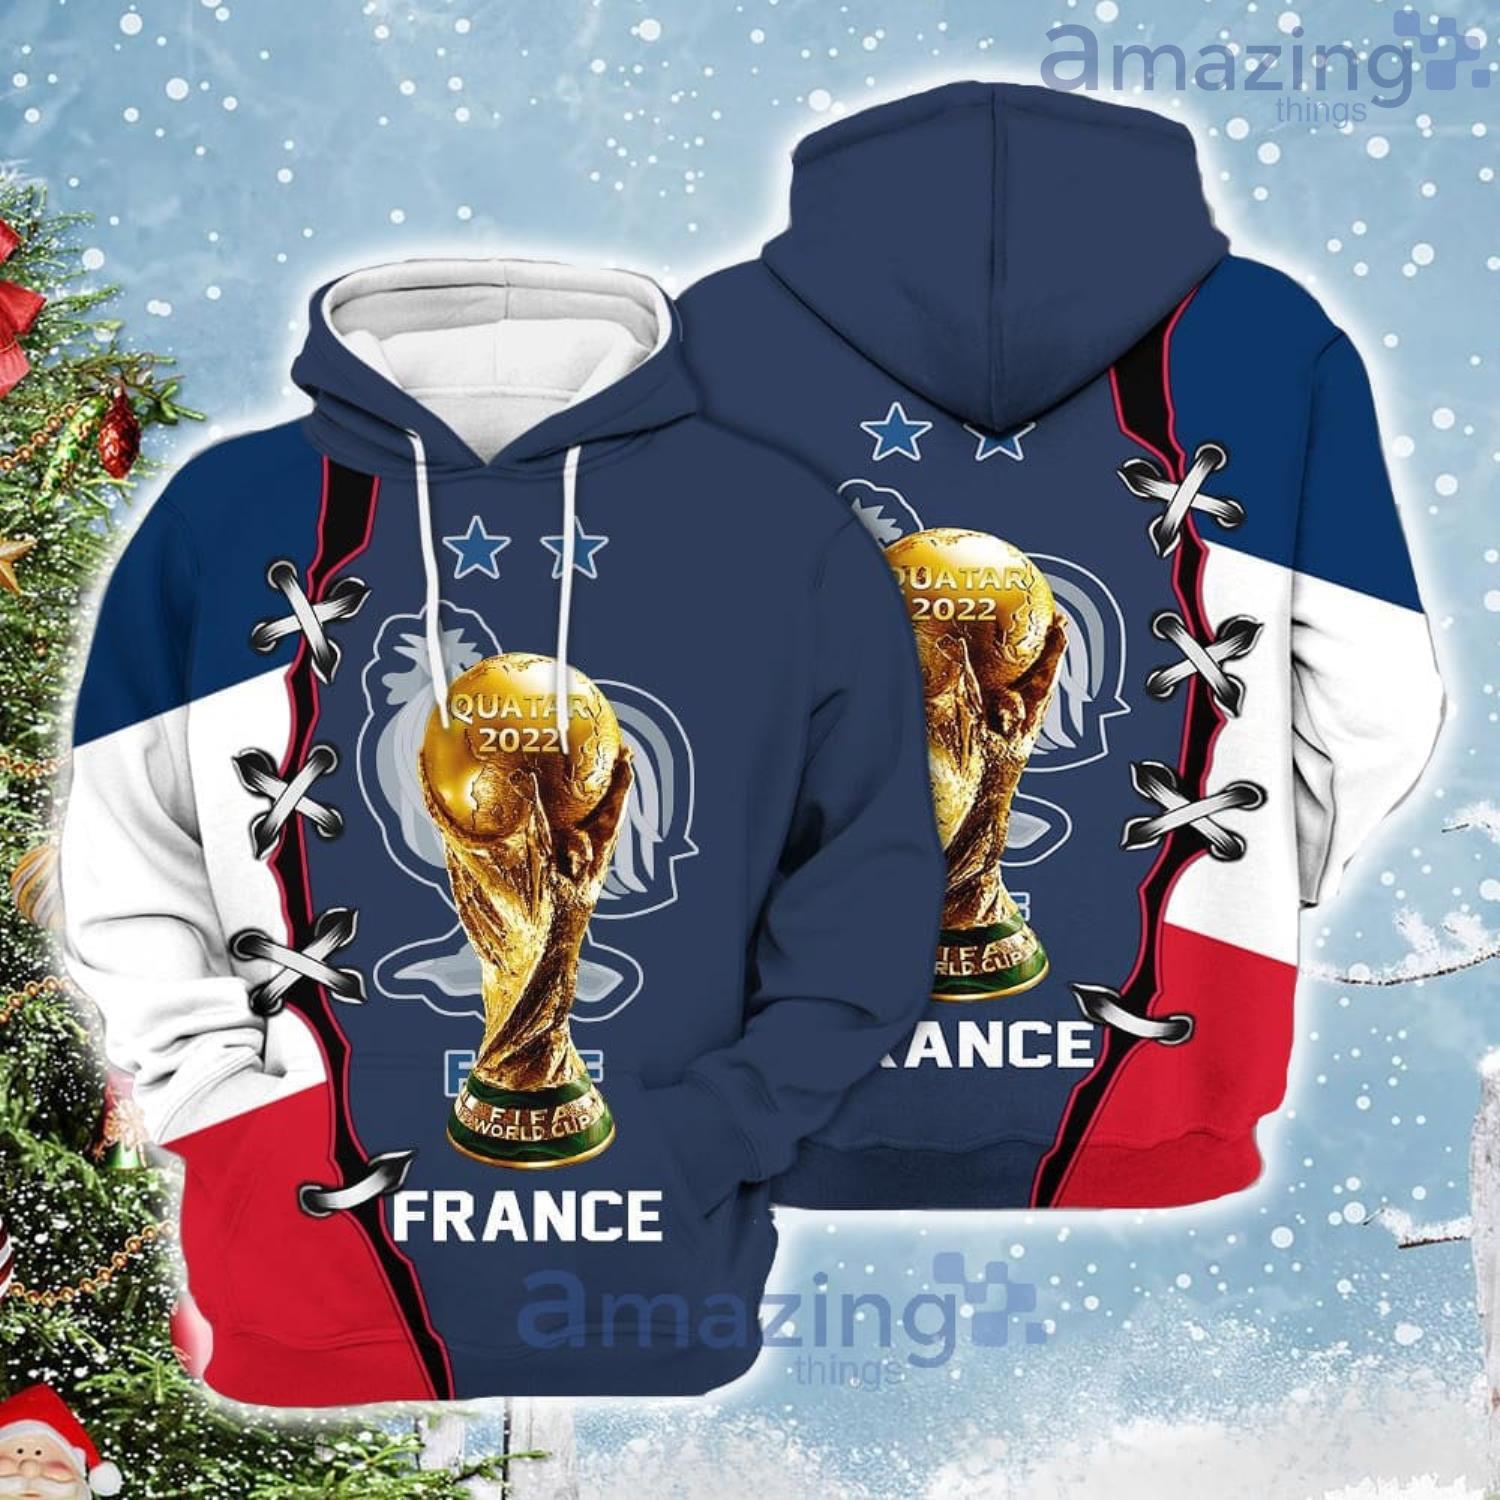 Switzerland Flag Sport Soccer World Cup Team World Cup 2022 Qatar Champions  Football Gift For Fans Sweater - Freedomdesign